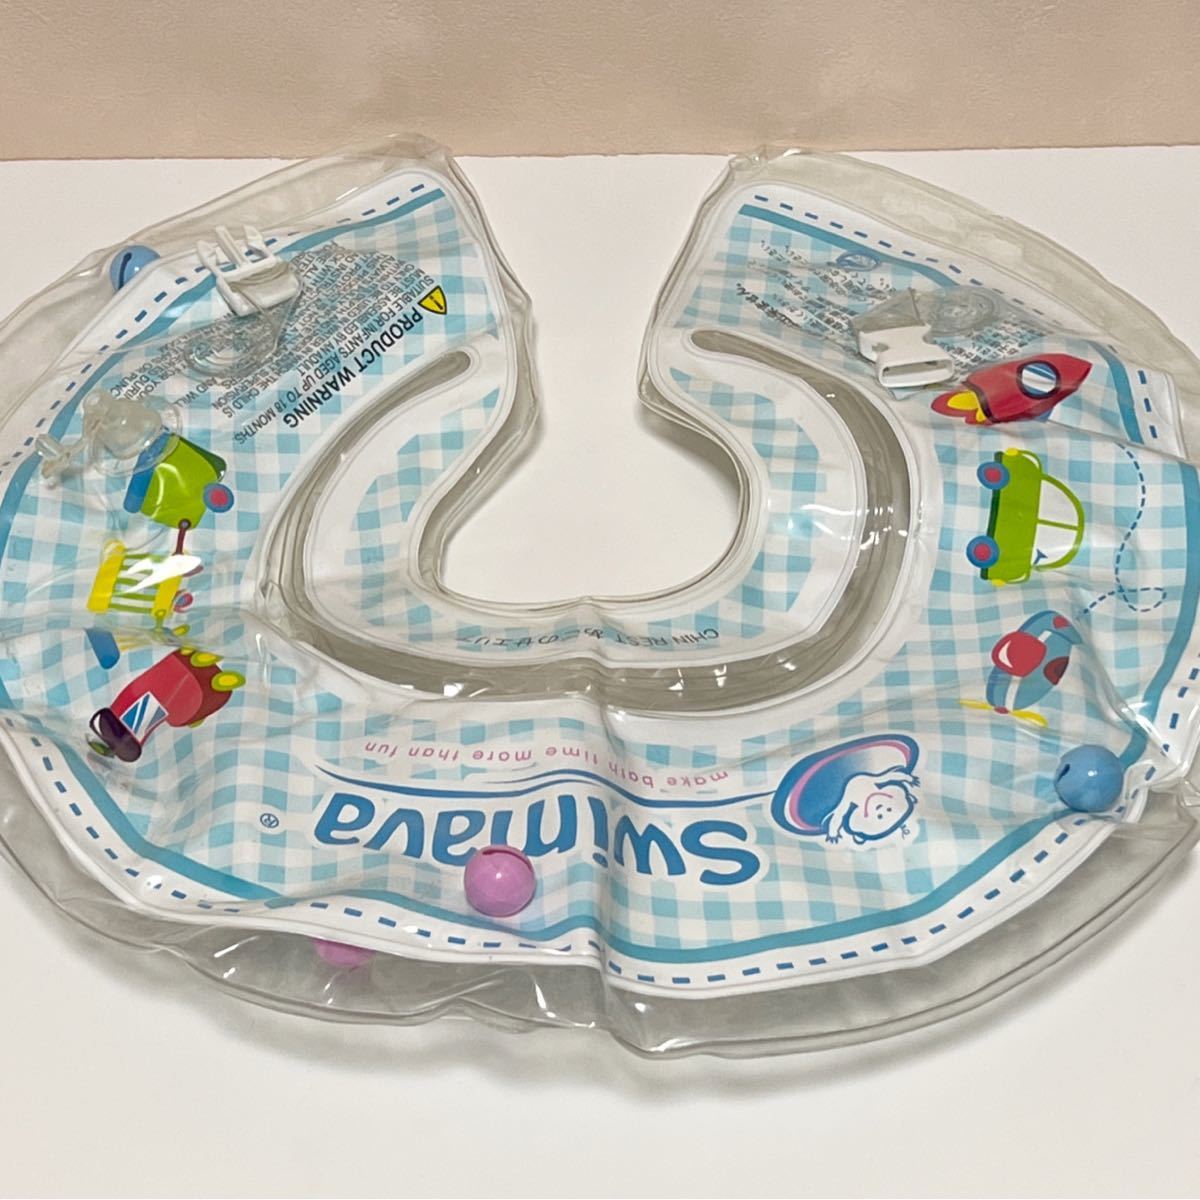 [ baby for neck swim ring ] acid ma-ba float . neck ring ( blue to rain ) SW120BLT regular size 1 -years old half about from use possibility baby swim ring 